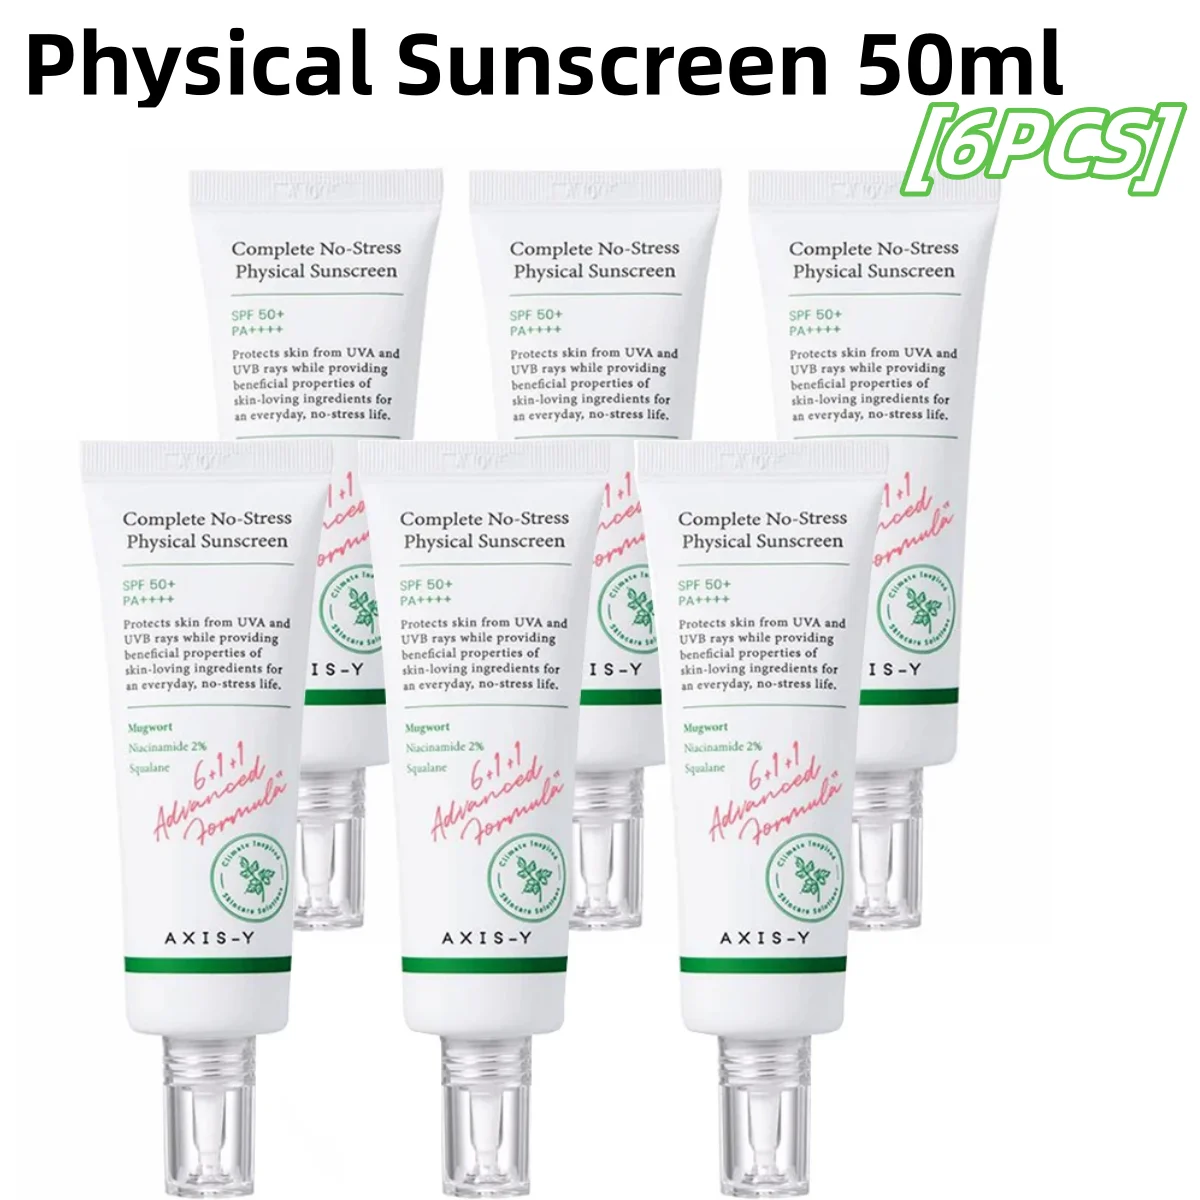 

6PCS AXIS-Y Complete No-Stress Physical Sunscreen 50ml SPF50+PA++++ Moisturizing Whitening Waterproof Skincare Refreshing Water